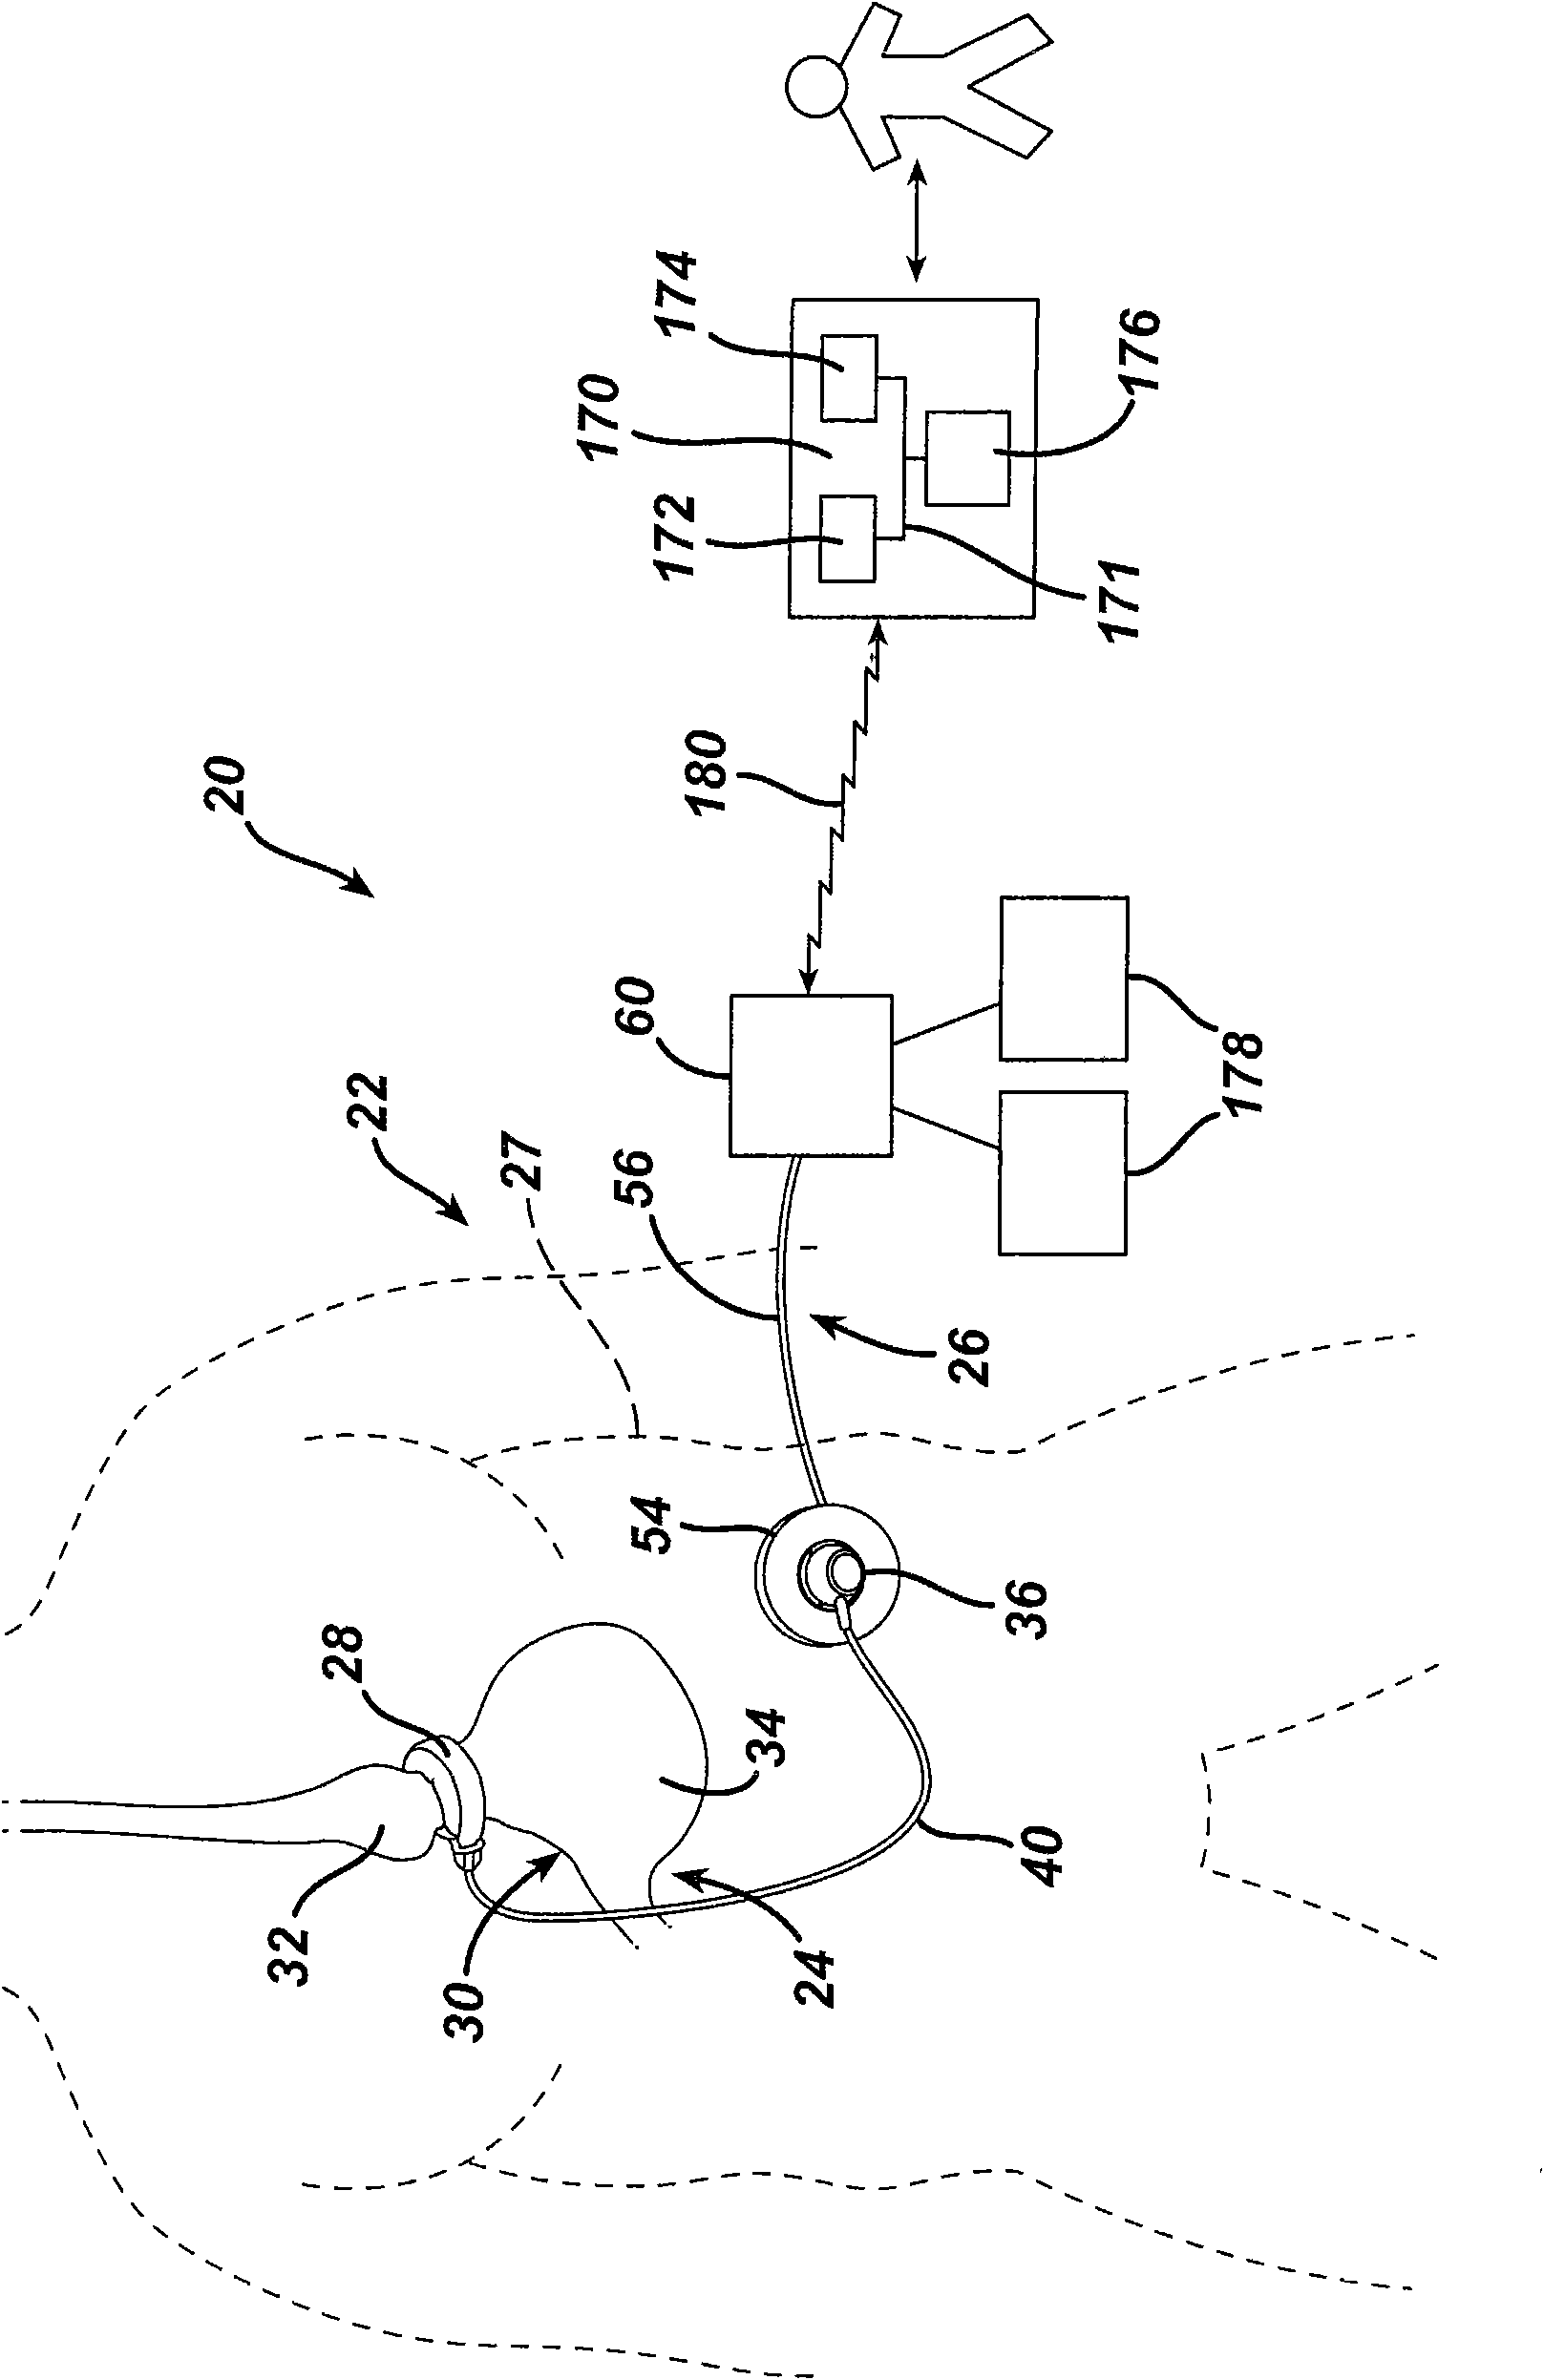 Gui with trend analysis for an implantable restriction device and a data logger